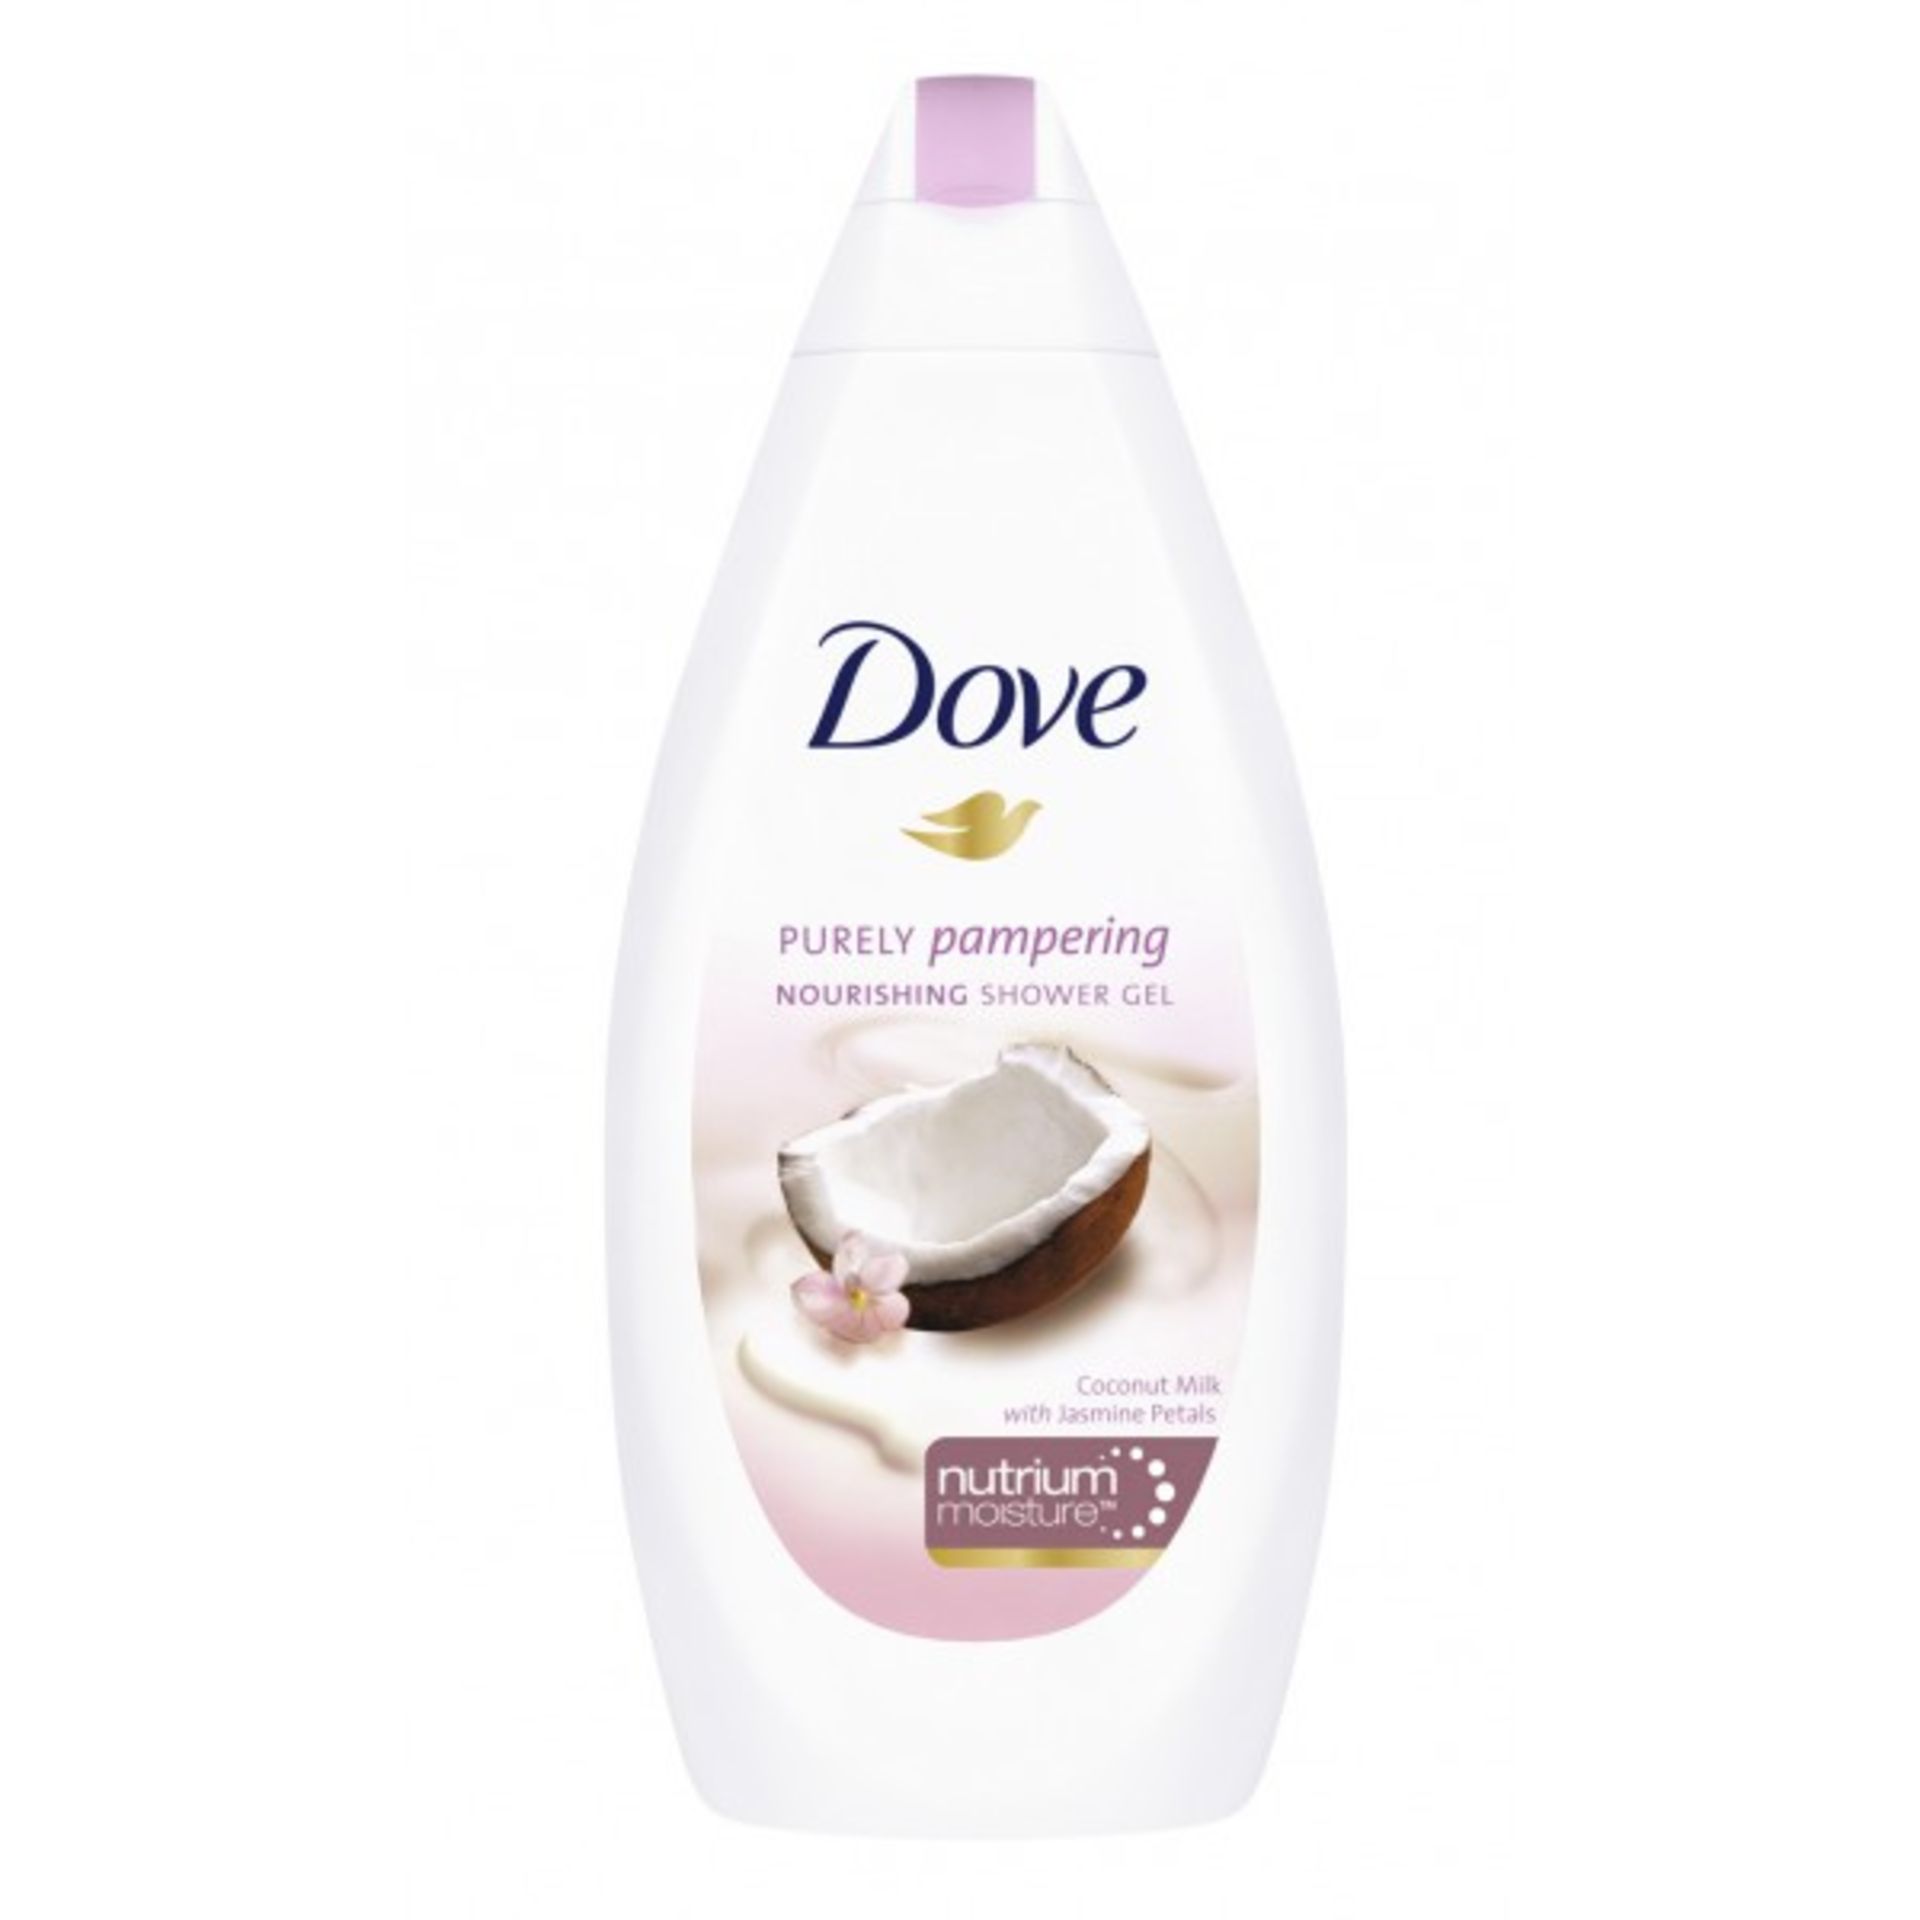 V Brand New 6 x 500ml Dove Purely Pampering Body Wash Tesco Price £23.40 for 6 X 2 Bid price to be